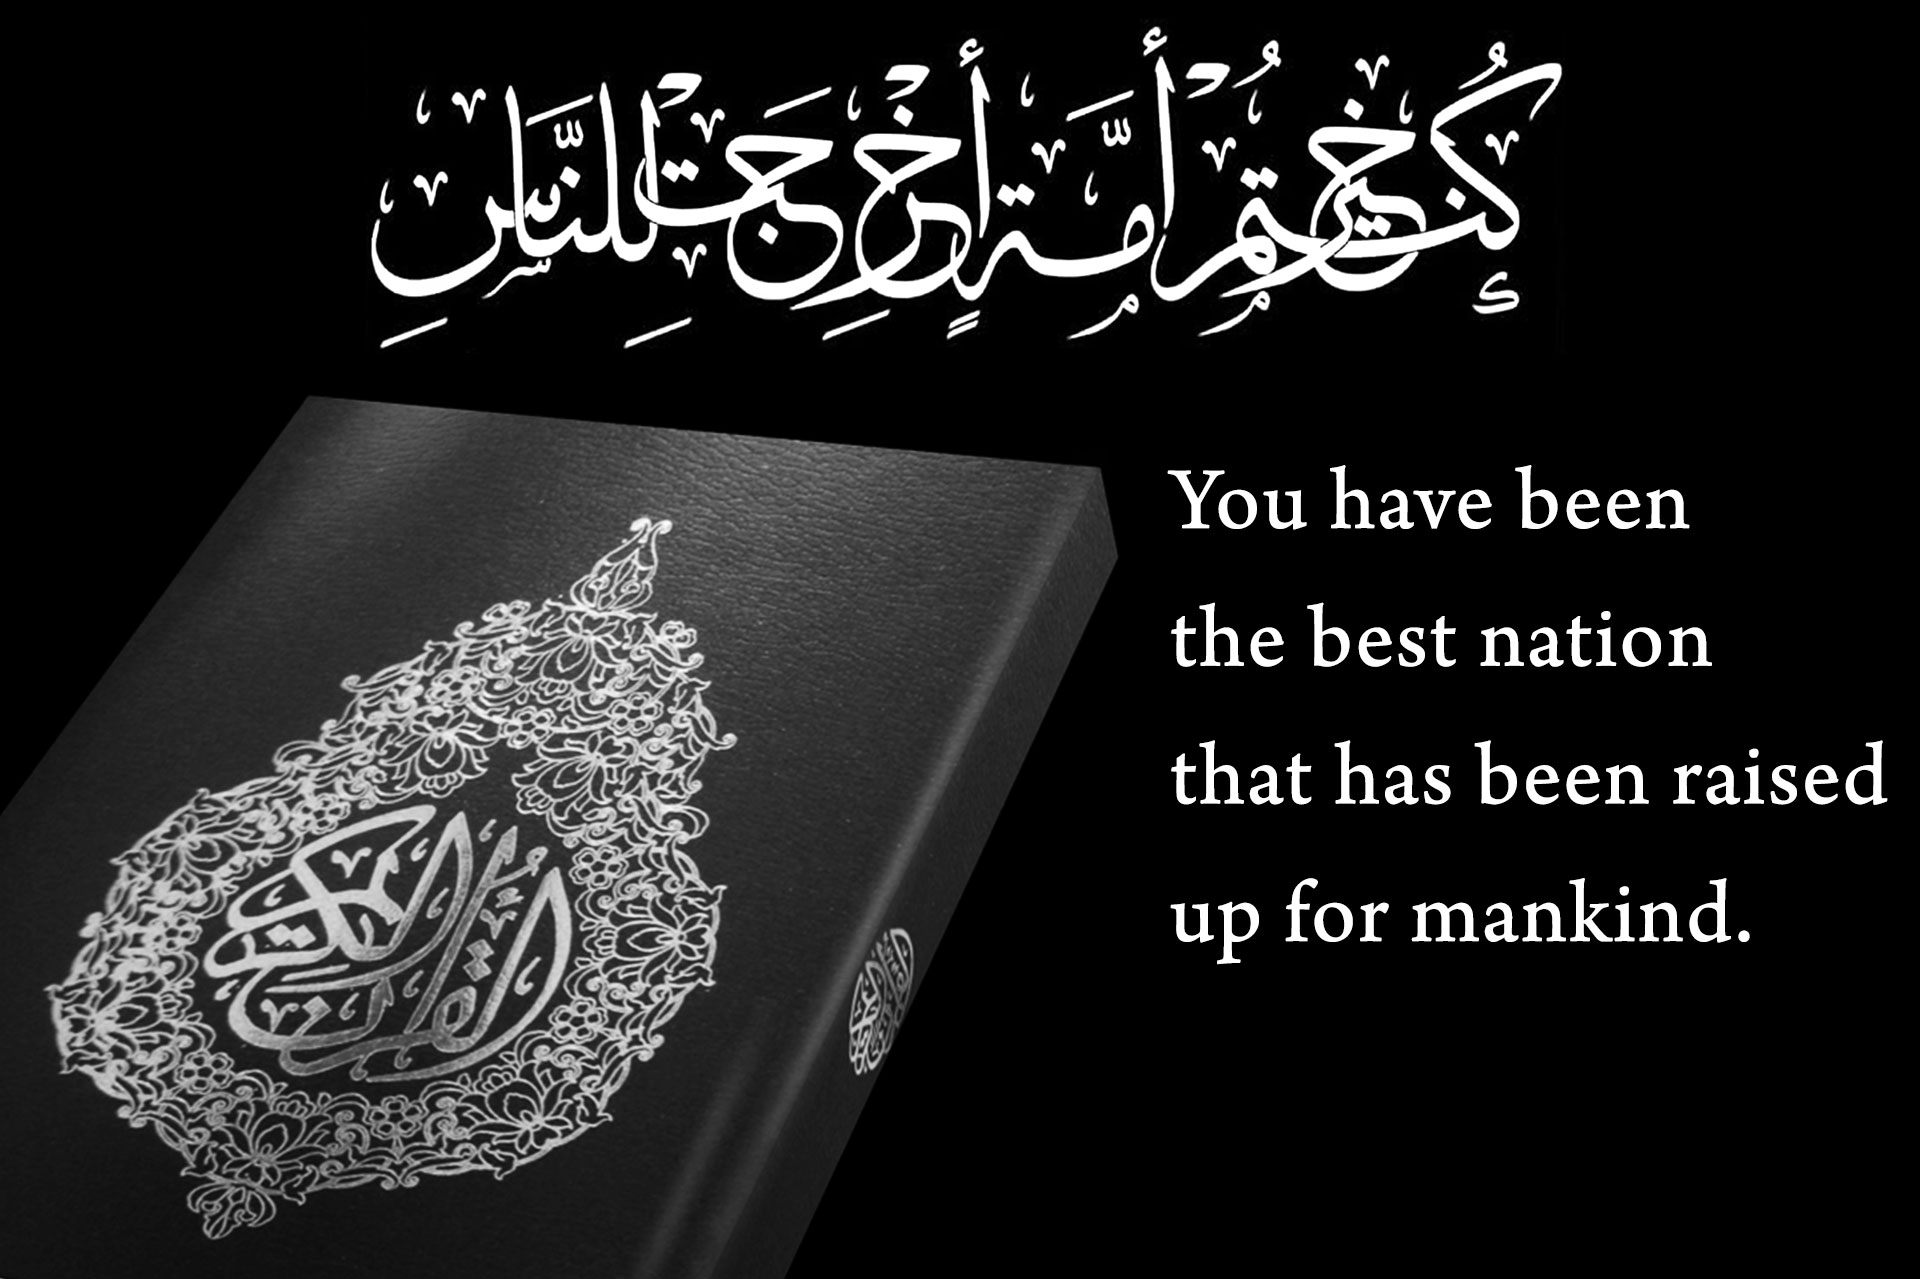 The Qur’an’s Concept of the “Best  Nation”